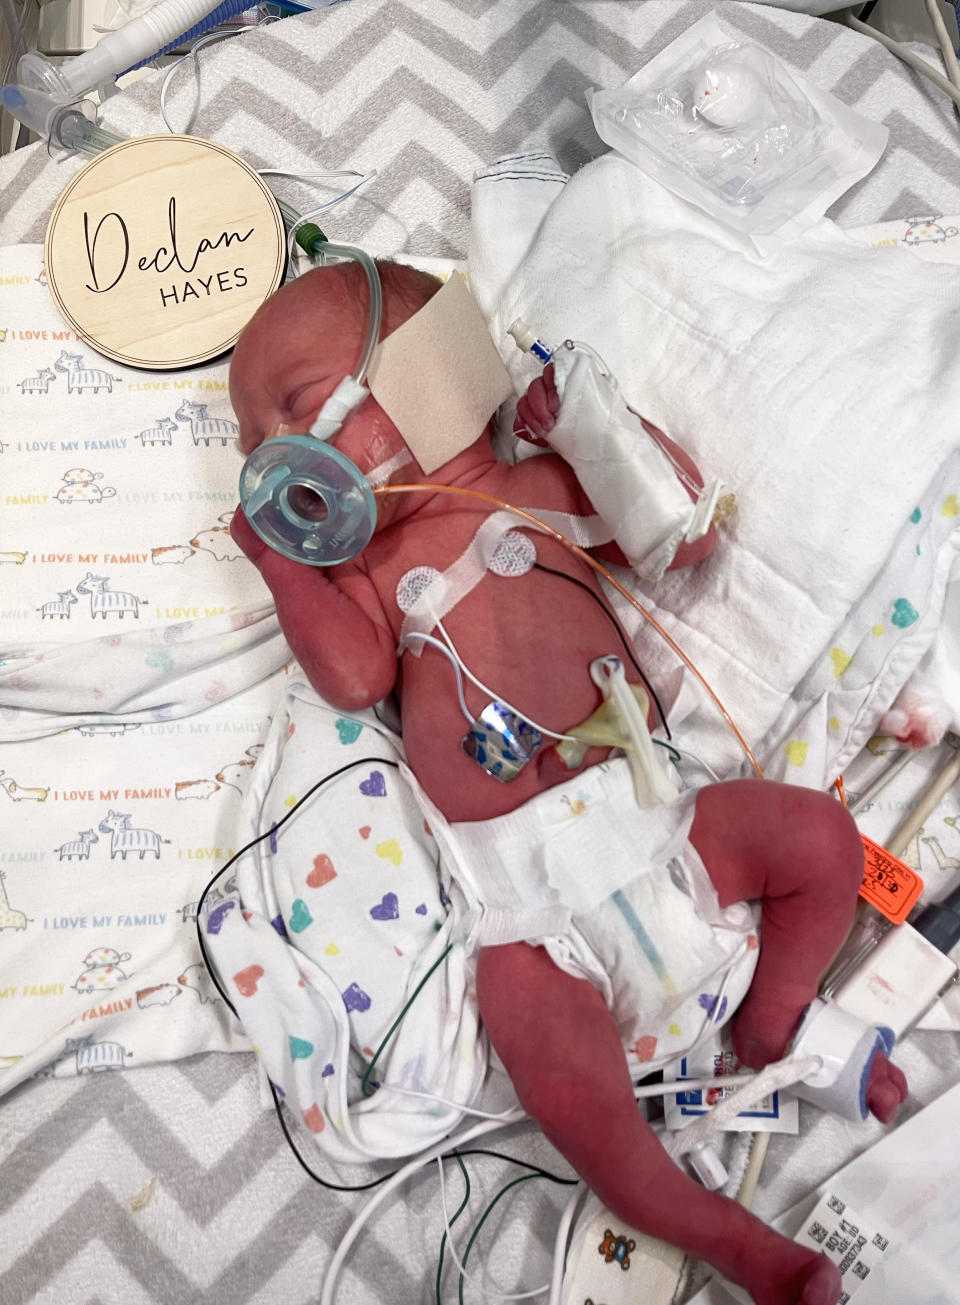 Declan, shortly after he was born premature at 32 weeks. (Courtesy Meghan Huston)